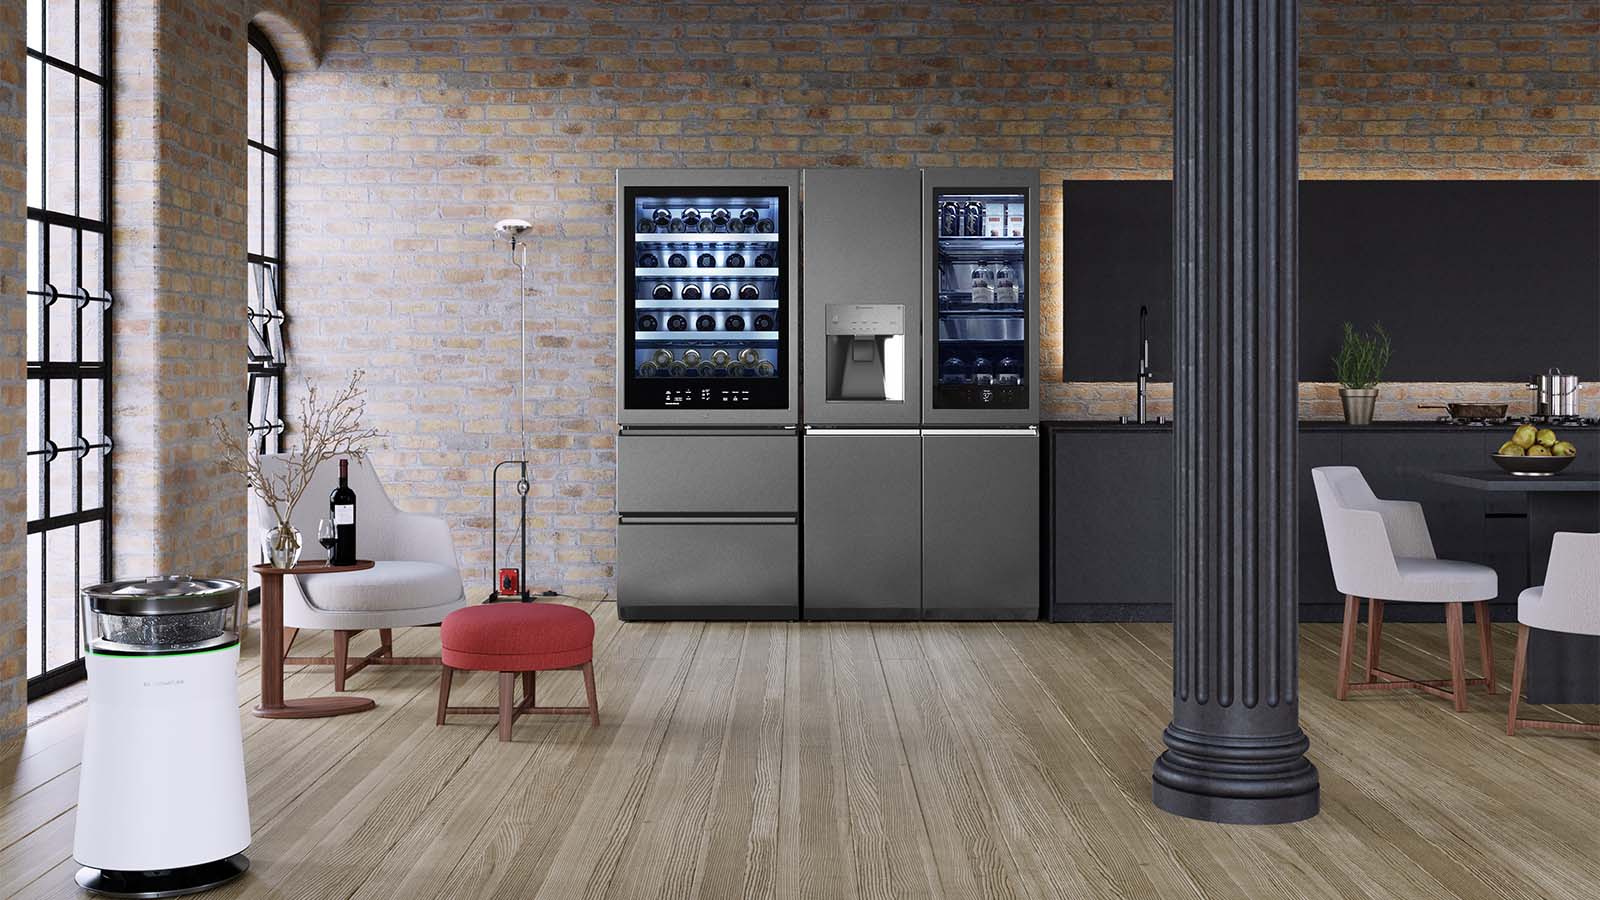 LG Signature wine cellar and fridge in a 3D Virtual Space